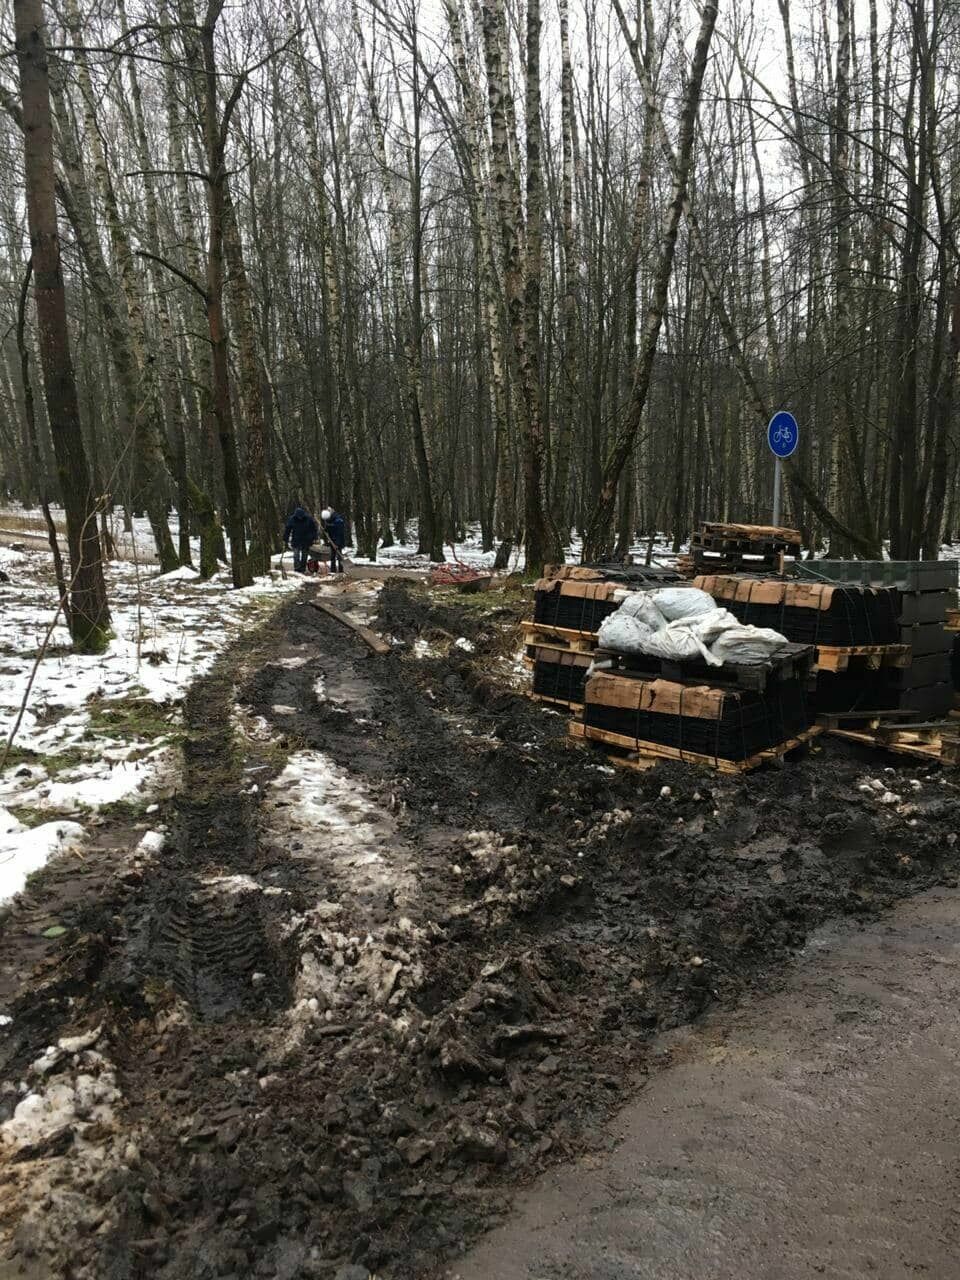 For 100 million rubles in Bitsevsky forest will "beautify" all living things